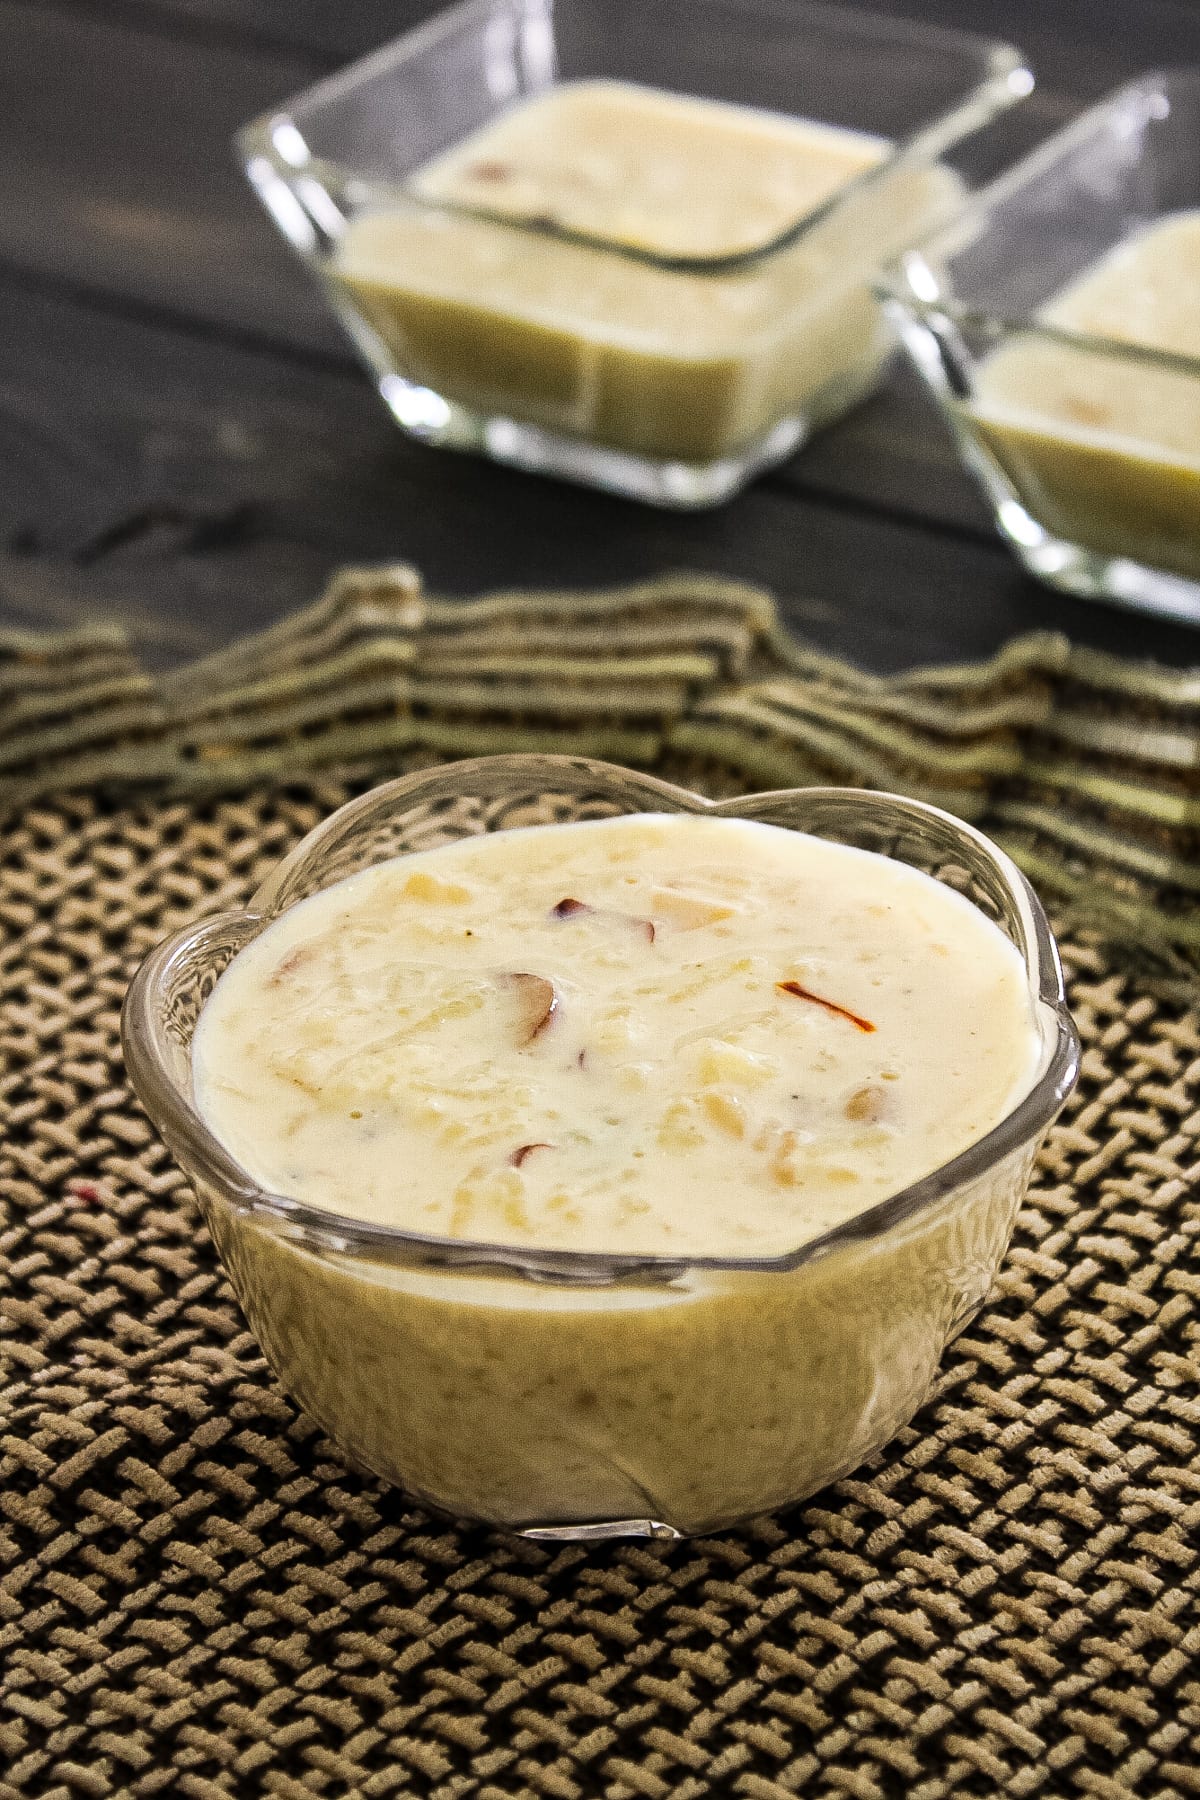 Planificado Respectivamente Gestionar Kheer With Condensed Milk (Milkmaid) - Spice Up The Curry